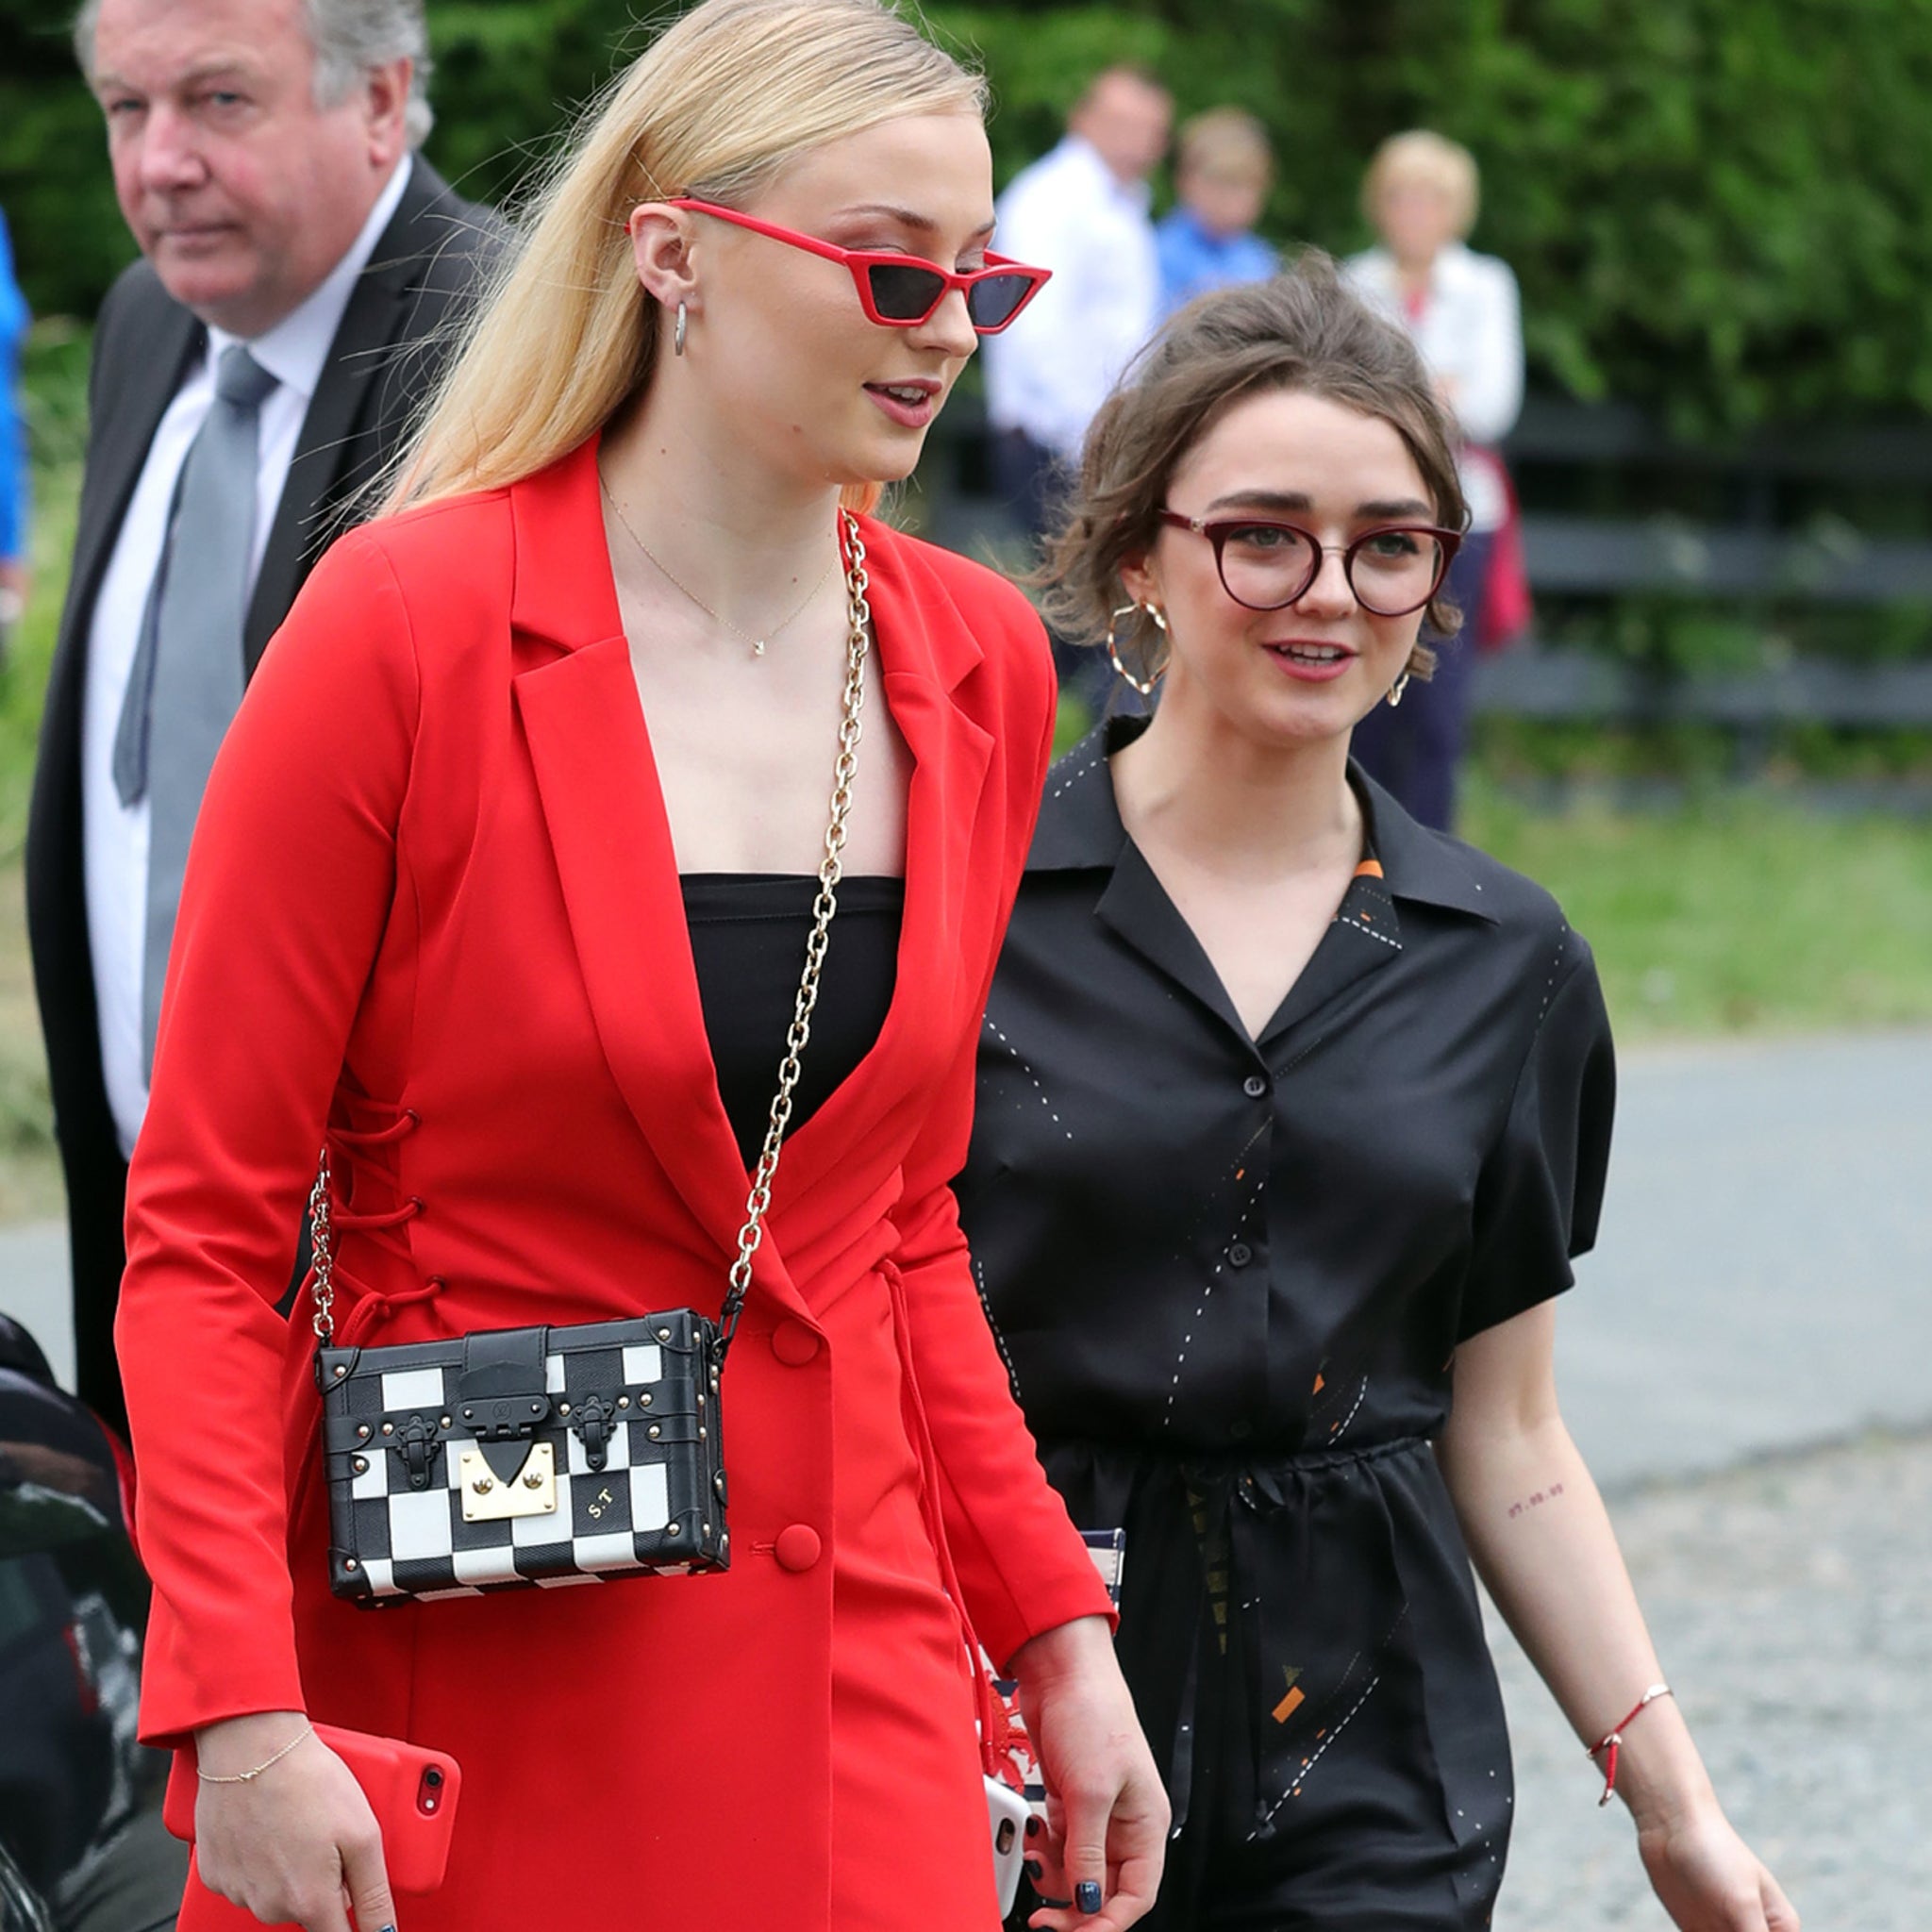 Sophie Turner Regrets the Outfit She Wore to Kit Harington's Wedding